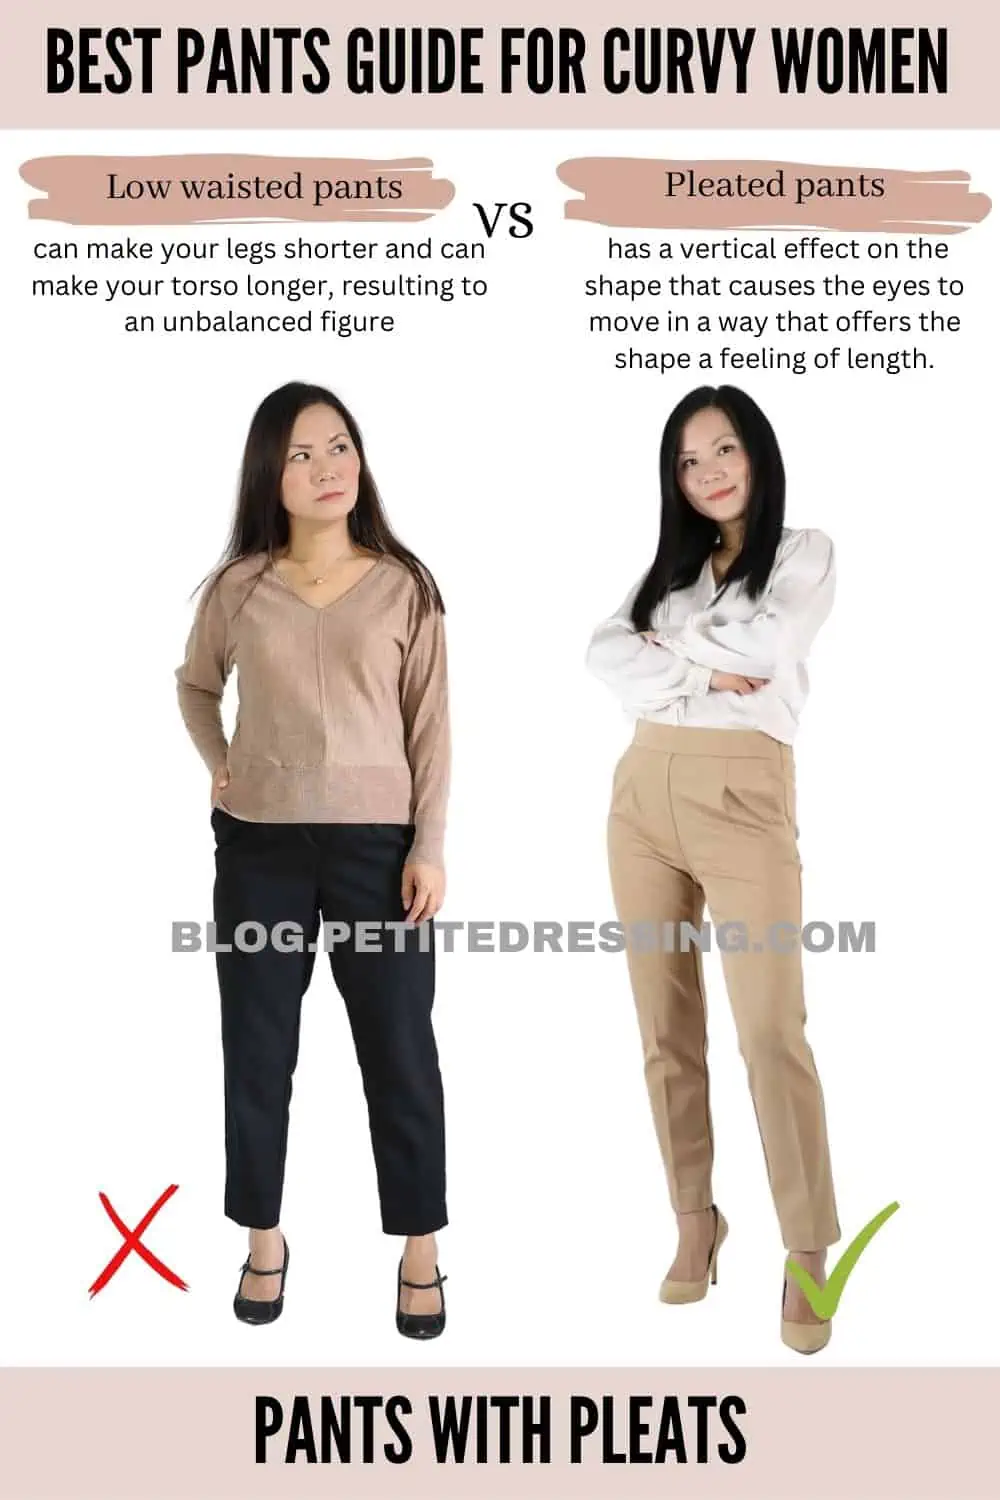 The Complete Pants Guide for Curvy Women - Petite Dressing